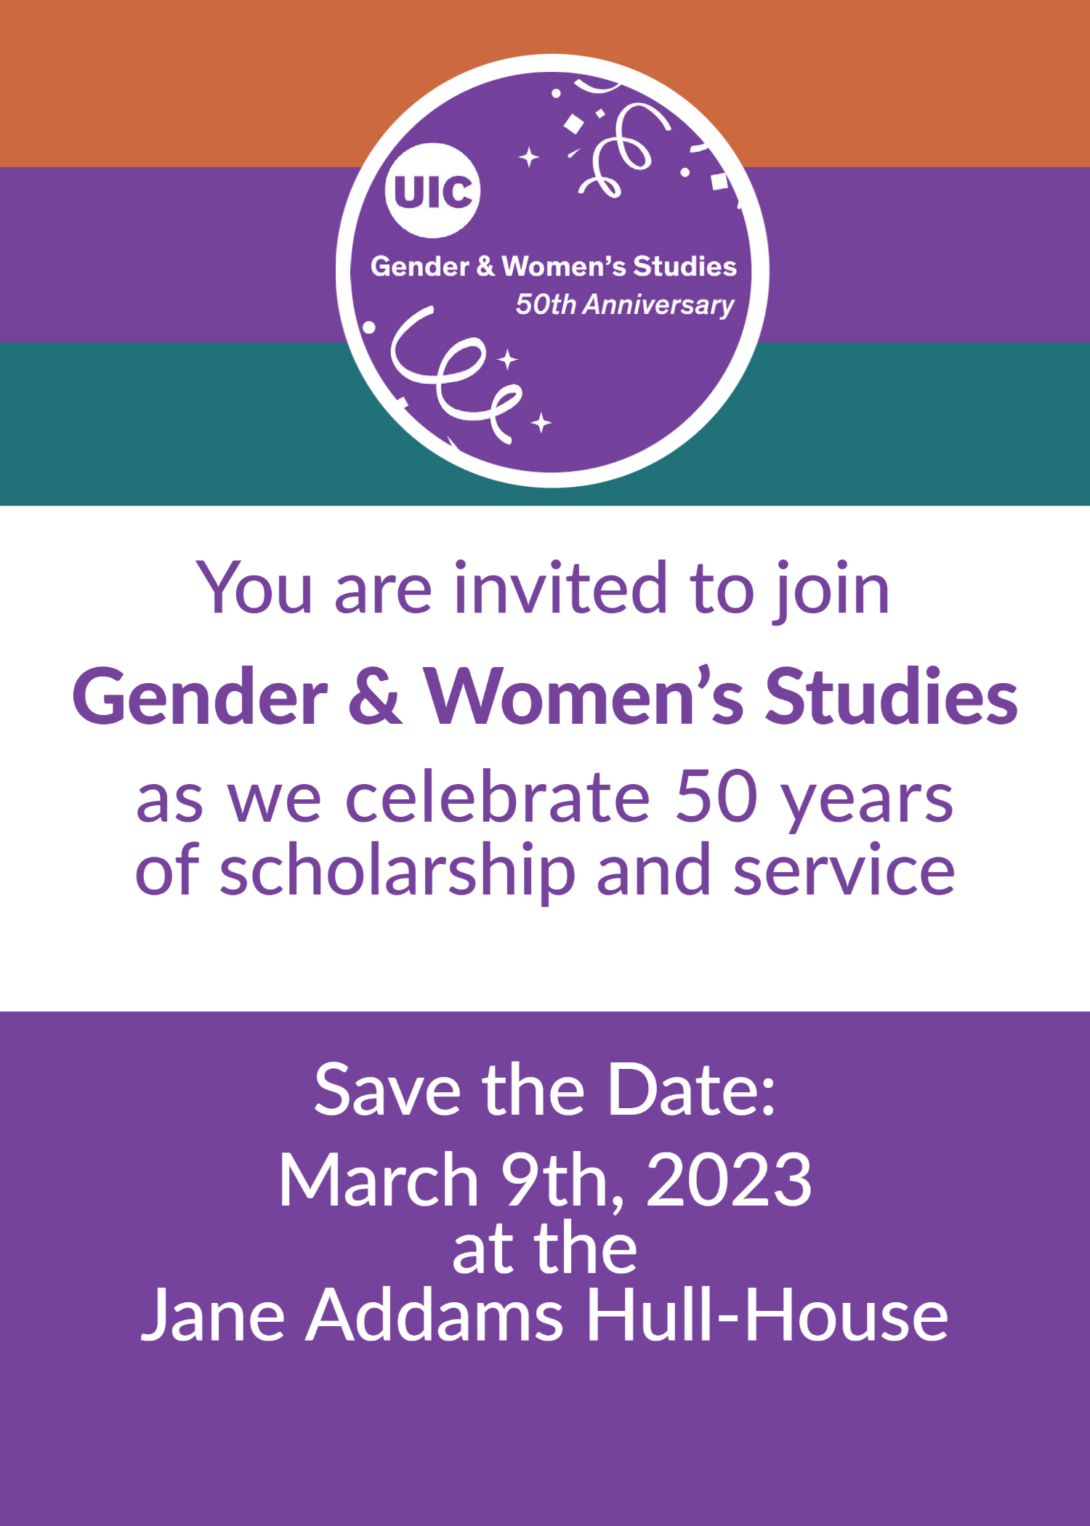 Colored bars of orange, purple, and pine green-blue surround the Gender & Women's Studies logo. Text reads 